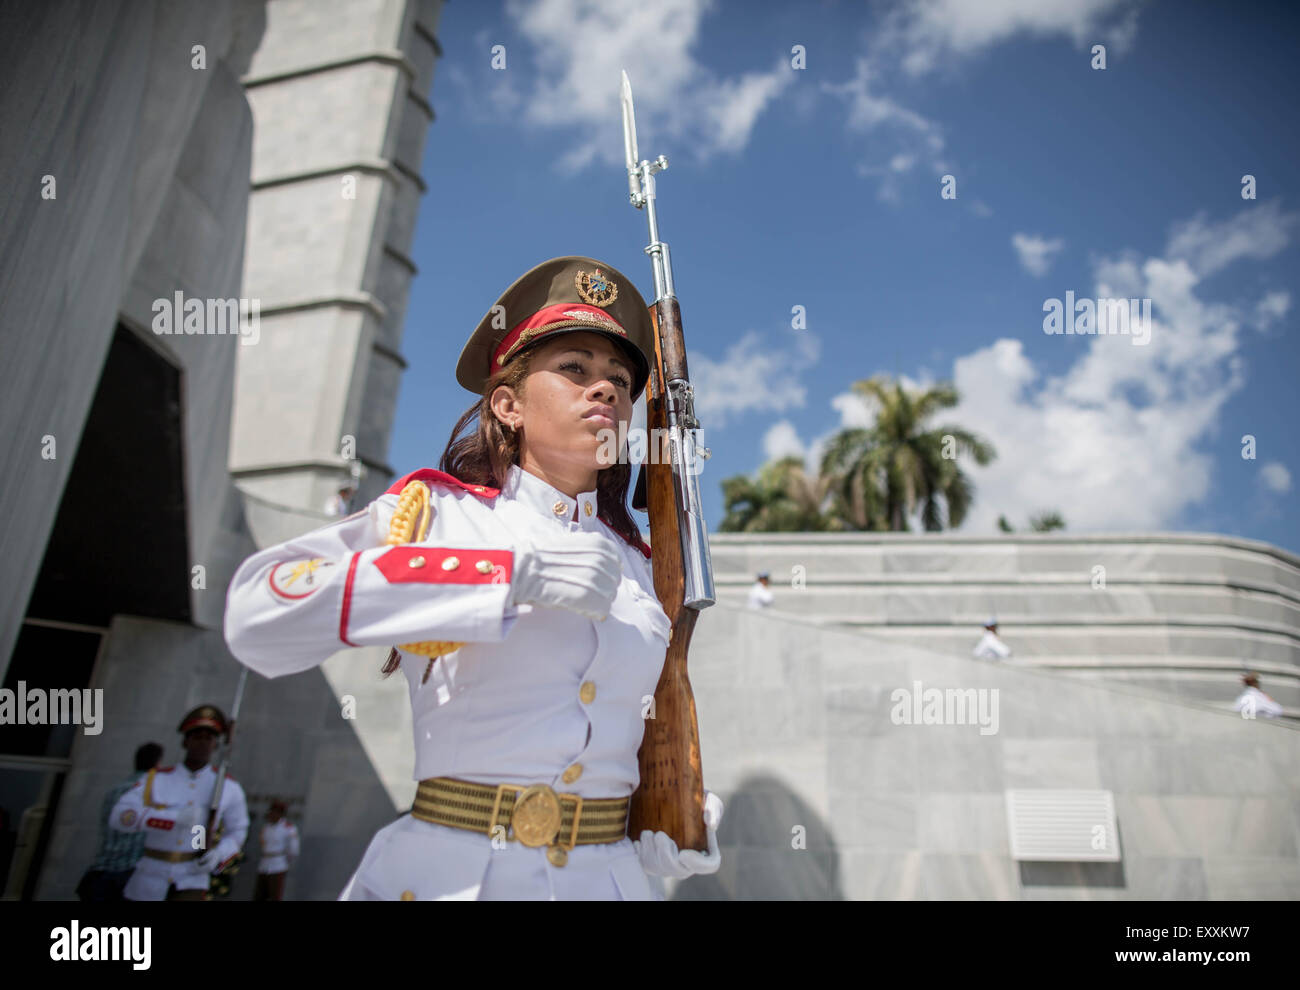 Havana, Cuba. 17th July, 2015. A female guard marches at the memorial for Cuban national hero Jose Marti in Havana, Cuba, 17 July 2015. Frank-Walter Steinmeier is the first German Foreign Minister to visit Cuba. PHOTO: MICHAEL KAPPELER/dpa/Alamy Live News Stock Photo